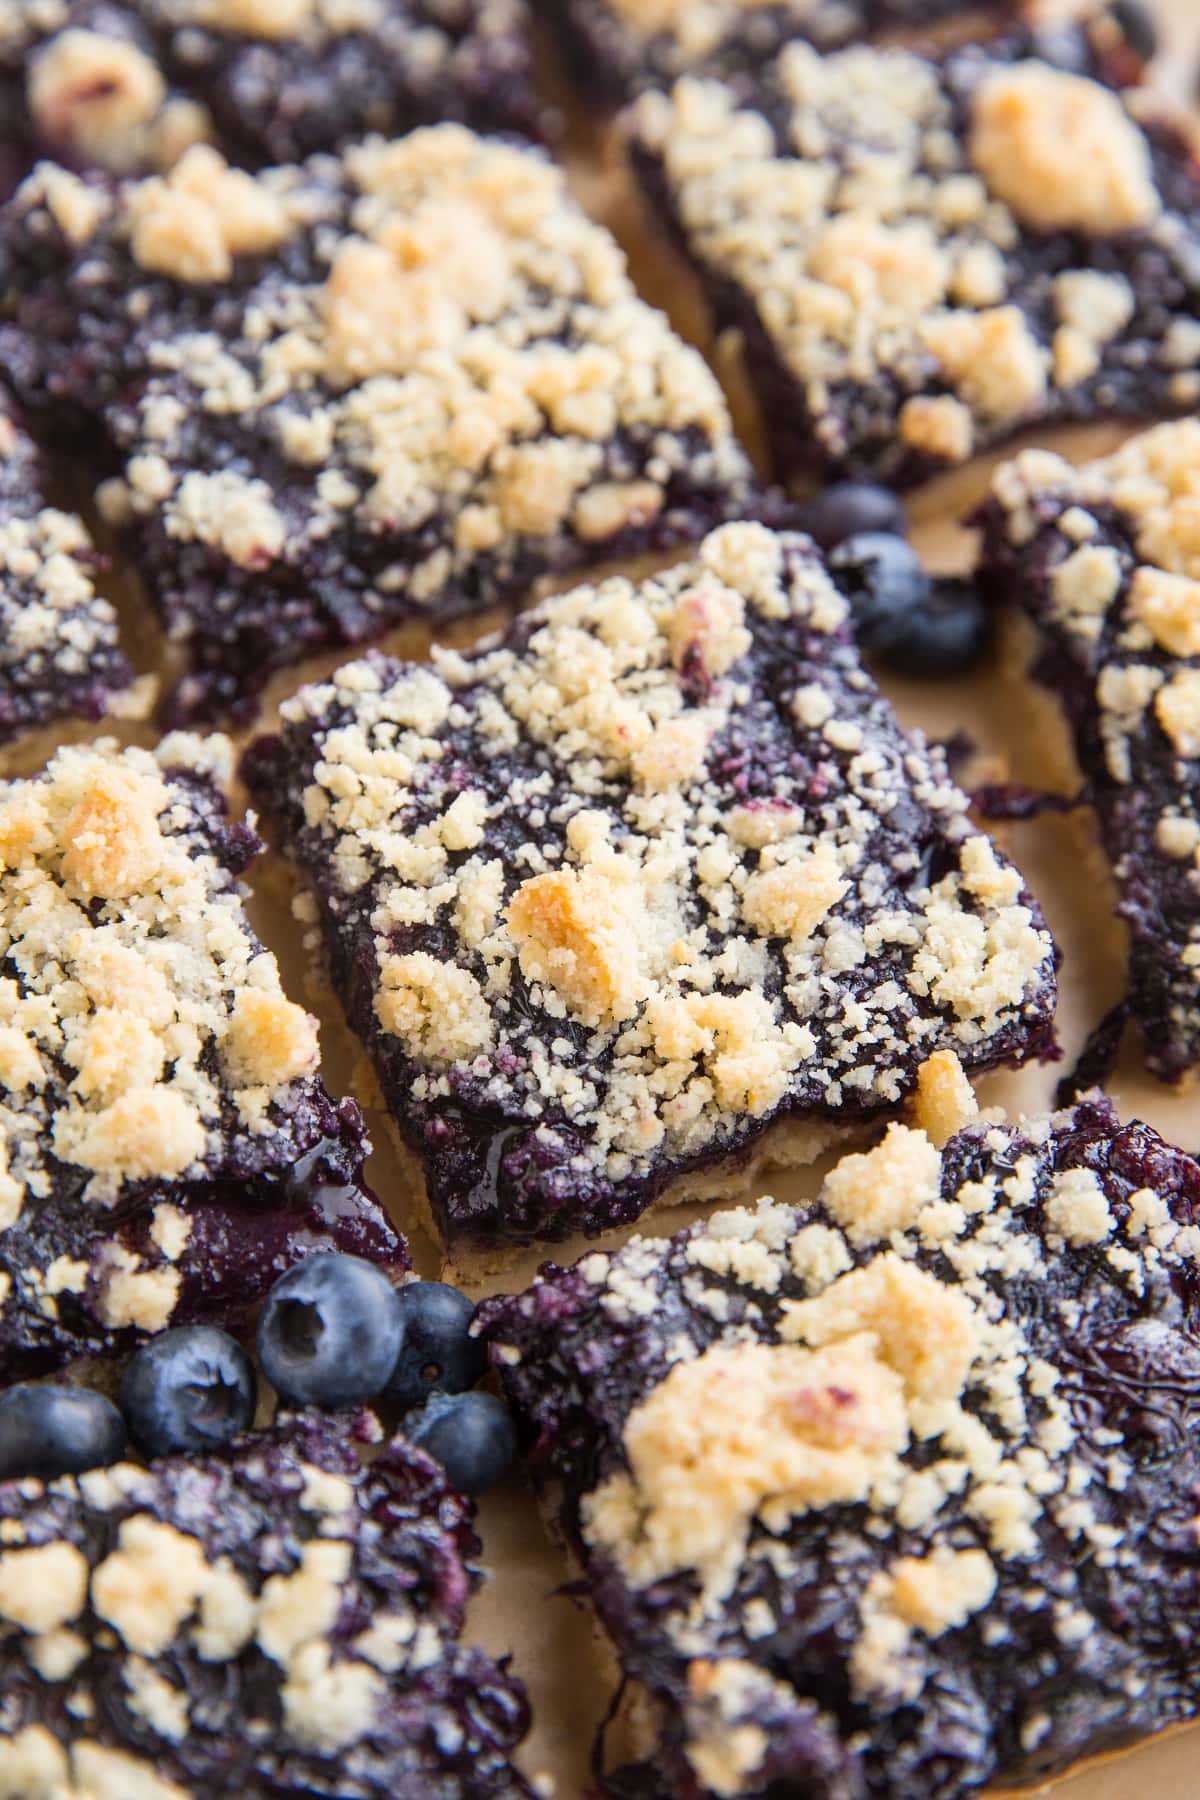 Low-Carb Blueberry Crumb Bars cut into slices on a sheet of brown parchment paper